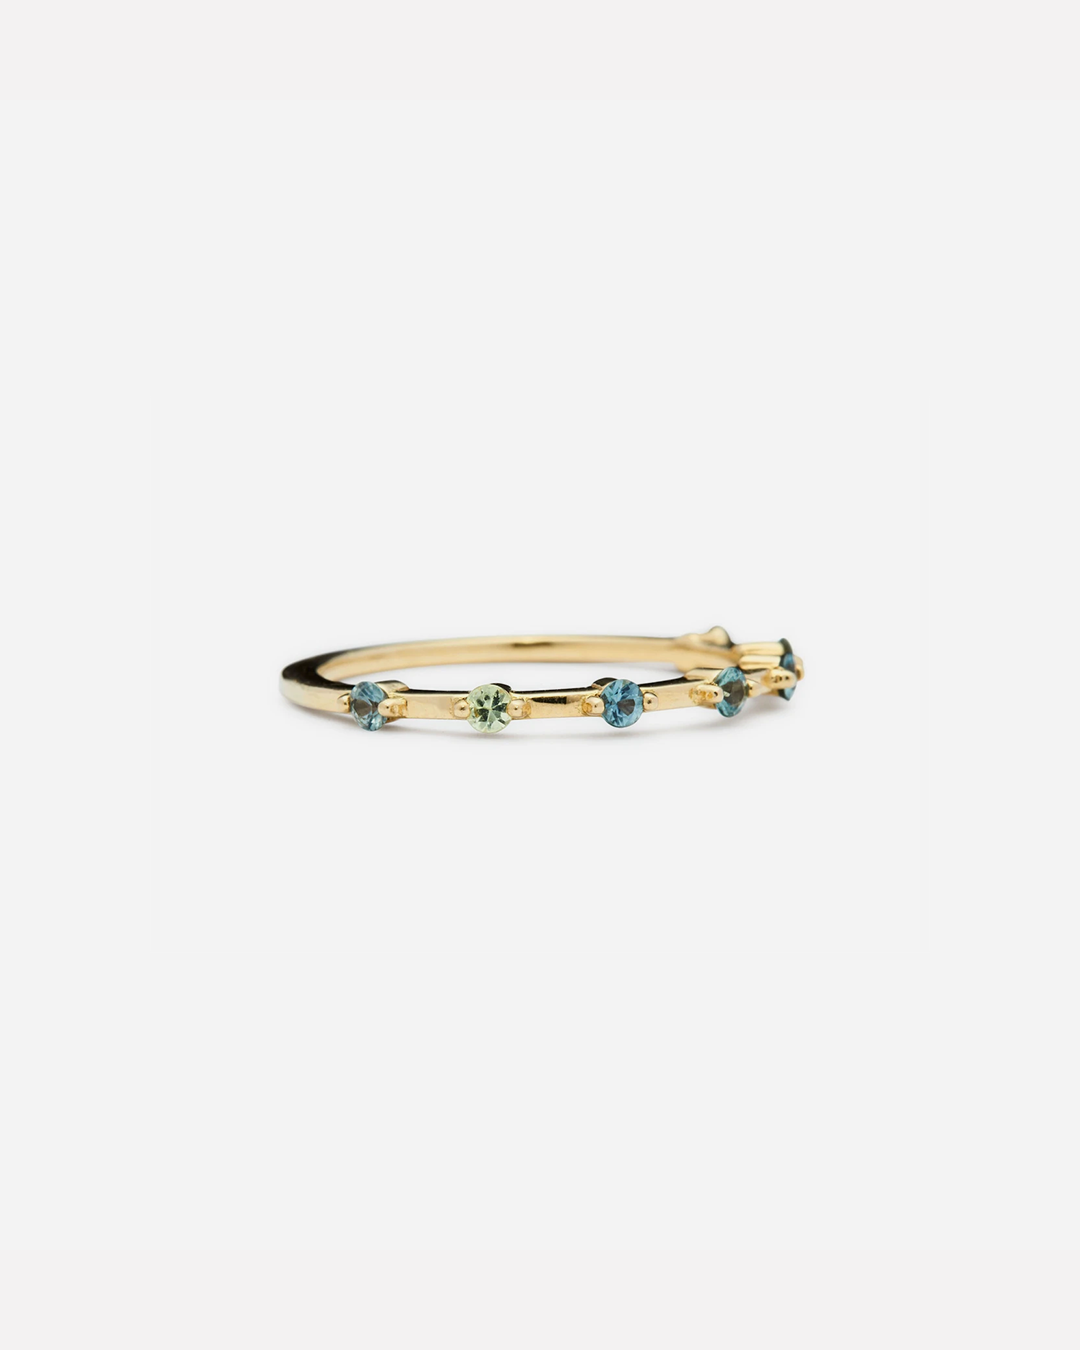 Dash / Gradient Sapphire Band By Casual Seance in Wedding Bands Category